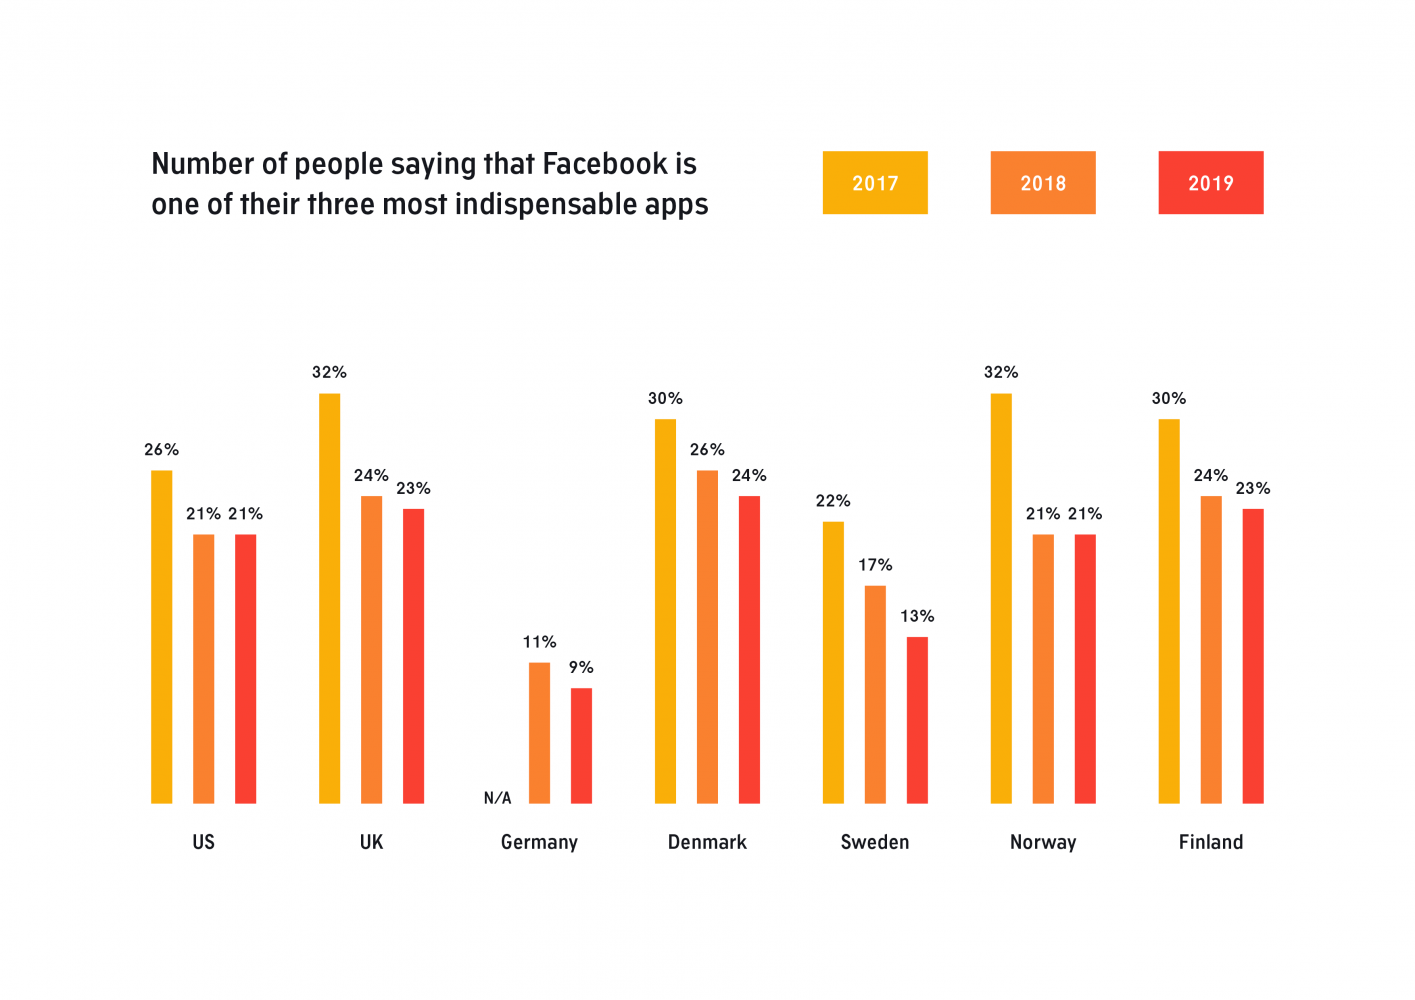 This chart shows the percentage of people saying that Facebook is one of their most indispensable apps